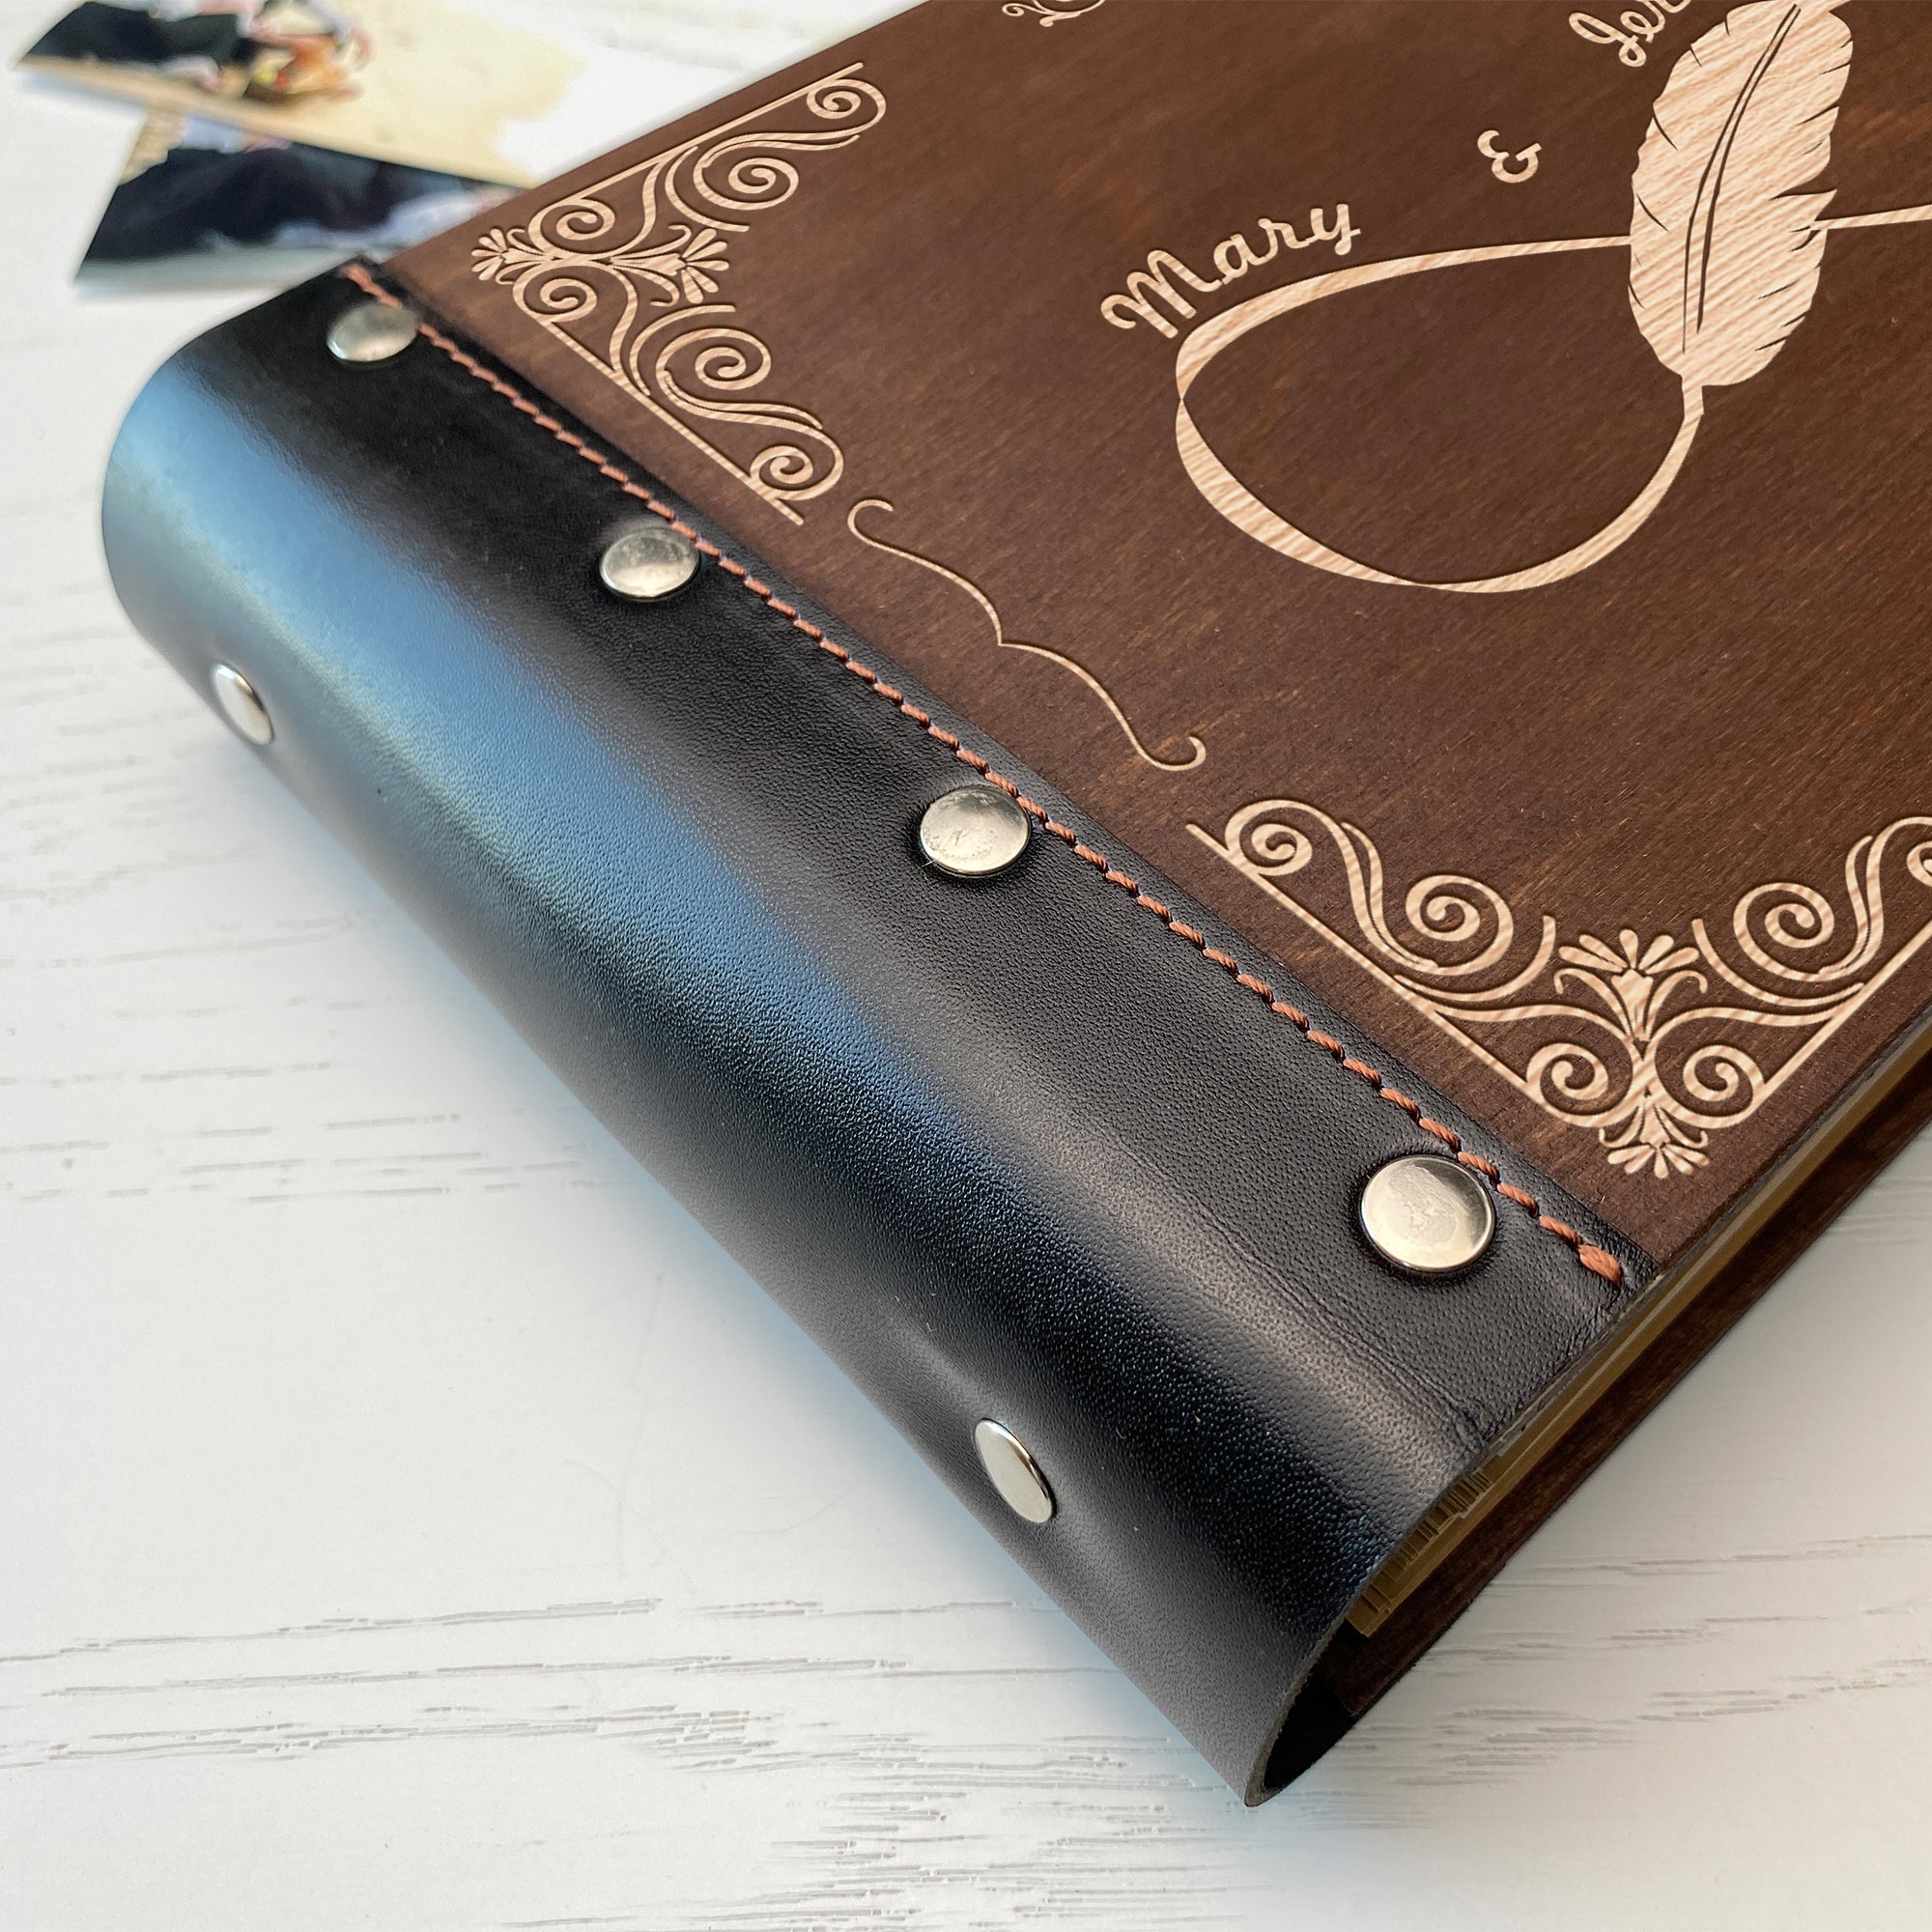 Personalized photo album with leather cover and Infinity engraving